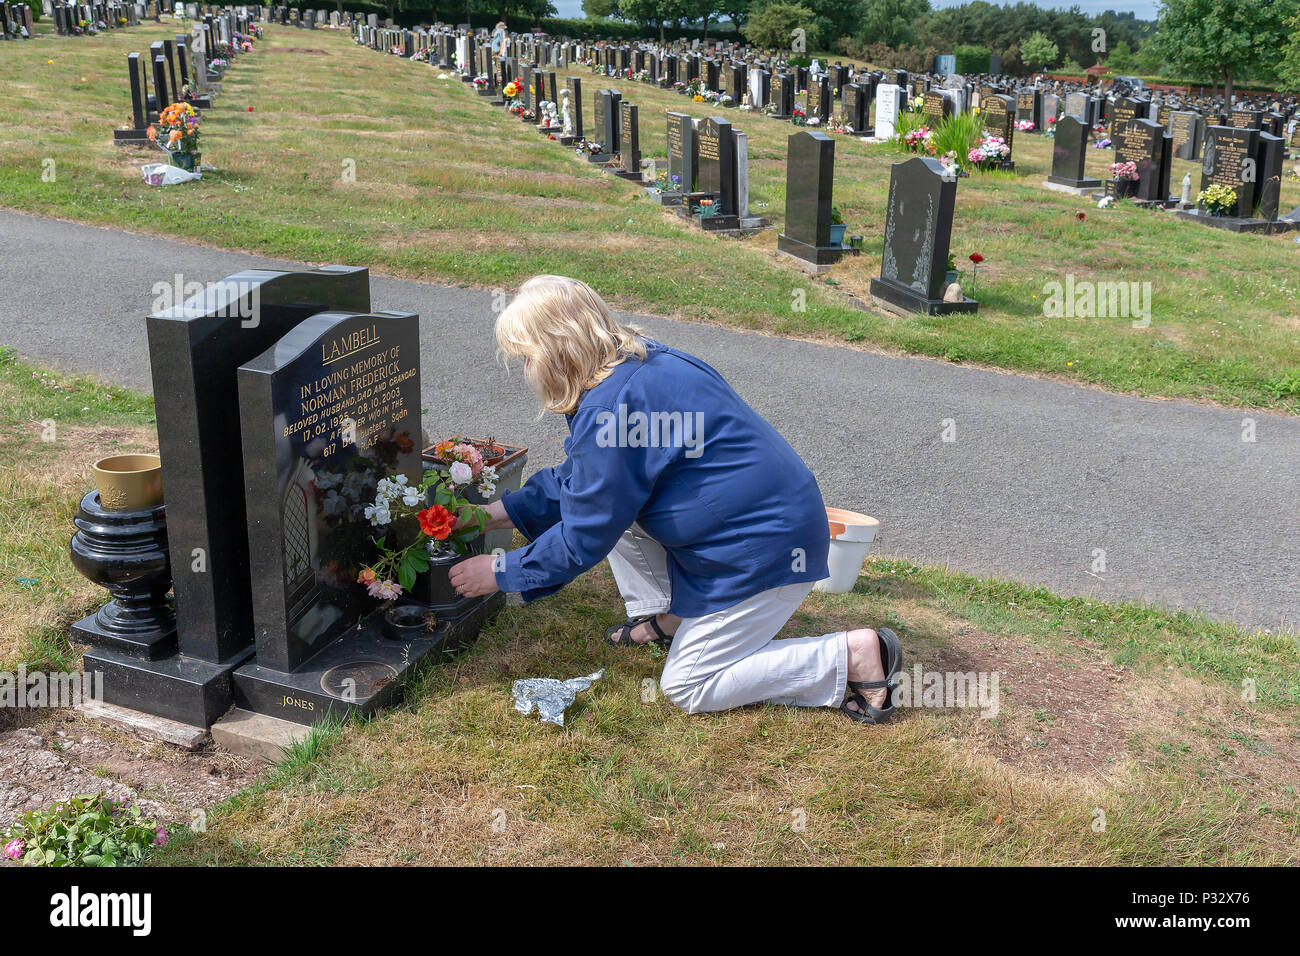 Warrington, UK, 17 June 2018 - Father's Day - Mature blonde lady joins many others by placing flowers on their deceased father's grave. Fox Covert, Warrington, Cheshire, England, UK Credit: John Hopkins/Alamy Live News Stock Photo